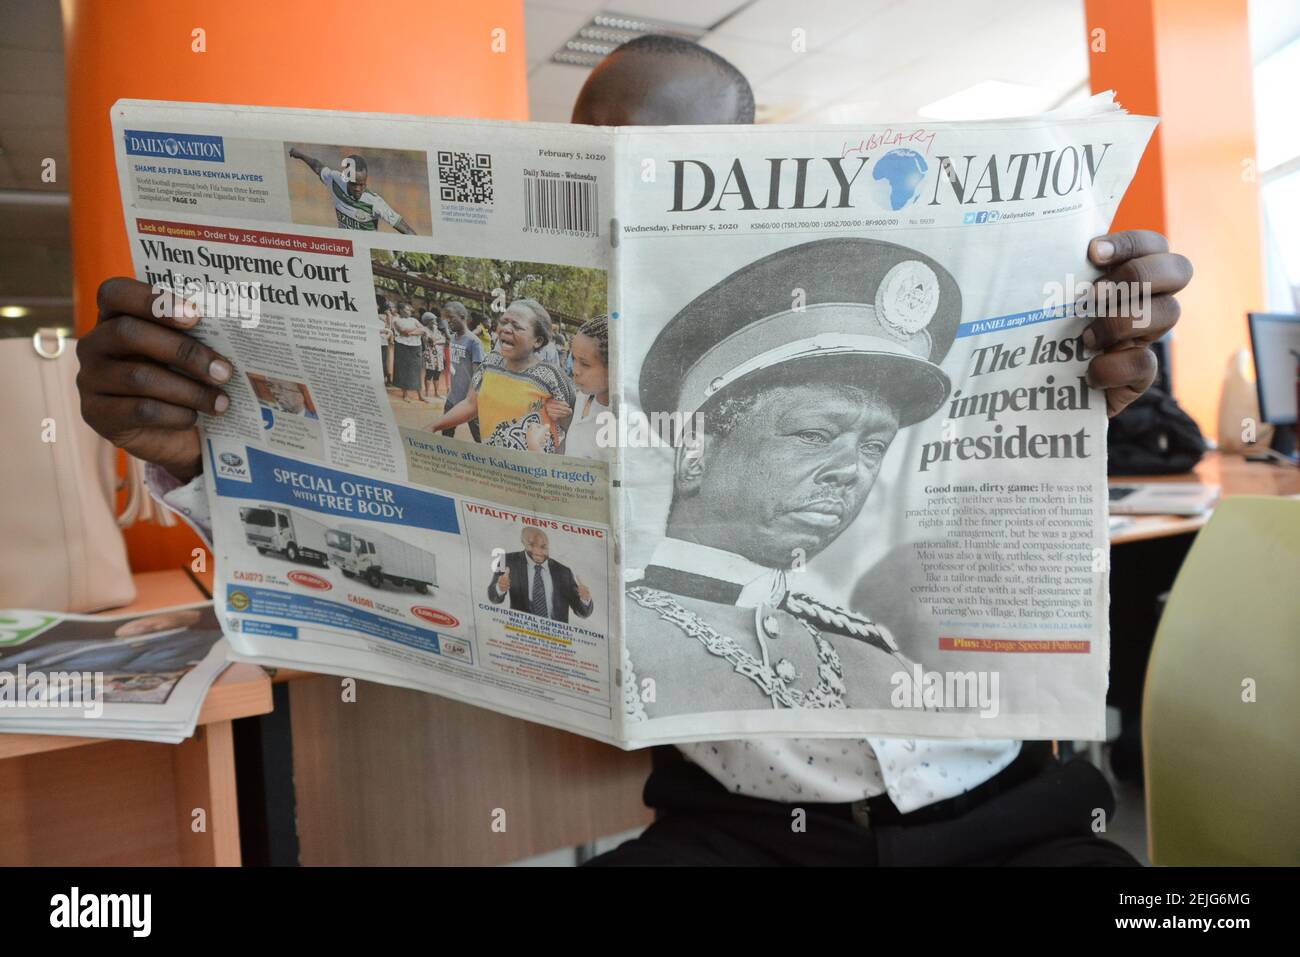 A man reads a copy of The Daily Nation newspaper that reports the death of  Daniel Arap Moi. Former President of Kenya, Daniel Arap Moi died aged 95  while undergoing treatment at